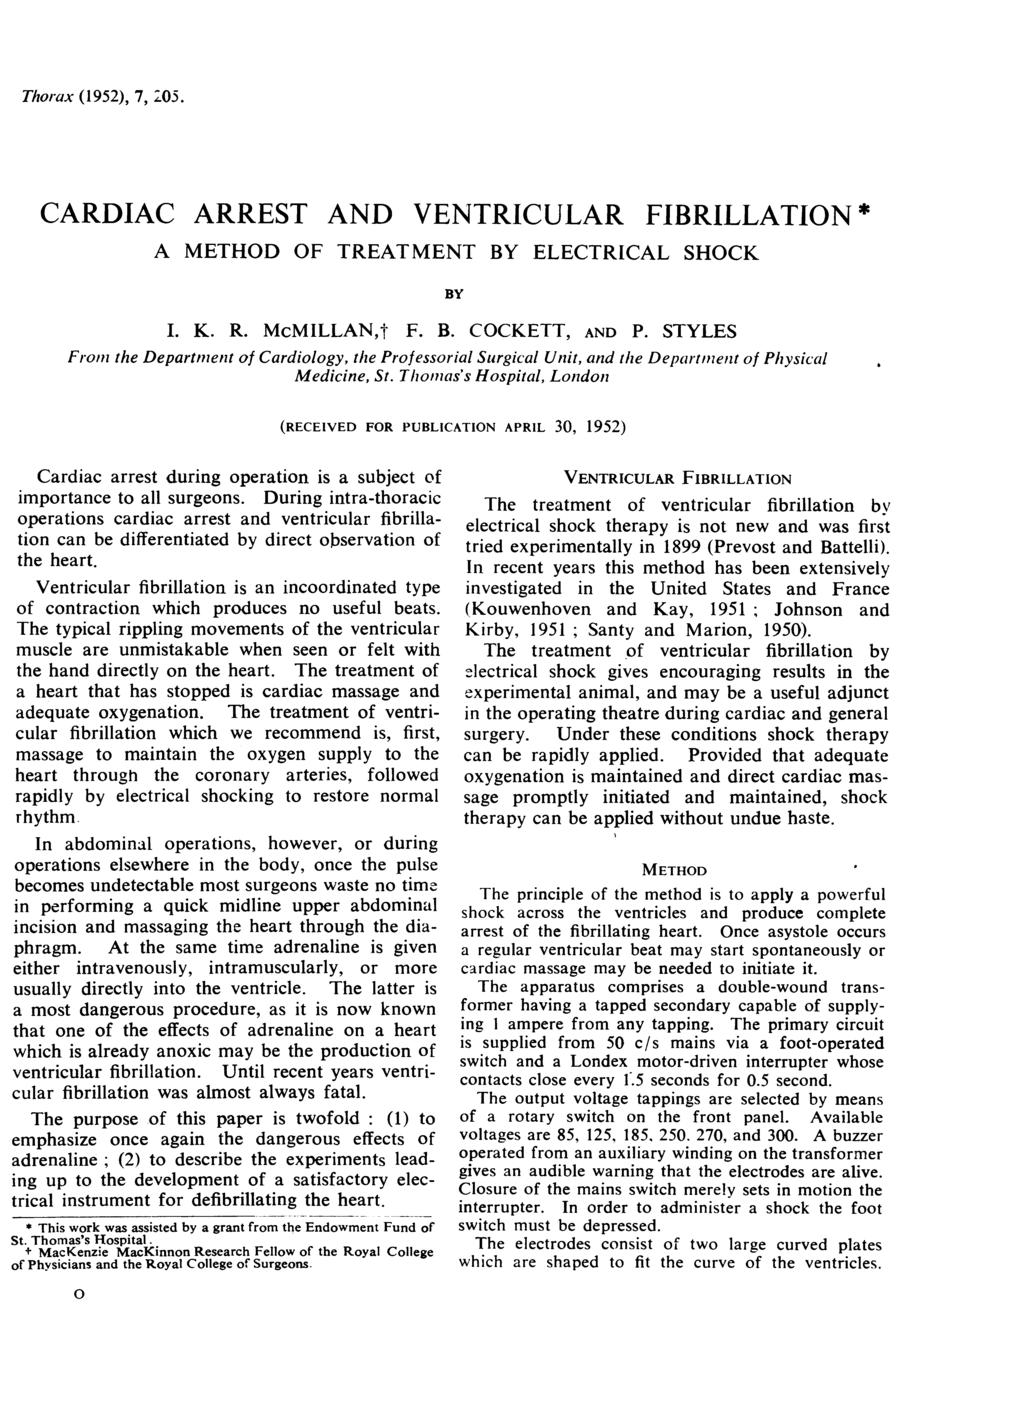 Thorax (1952), 7, 205. CARDIAC ARREST AND VENTRICULAR FIBRILLATION * A METHOD OF TREATMENT BY ELECTRICAL SHOCK BY I. K. R. MCMILLANt F. B. COCKETT, AND P.